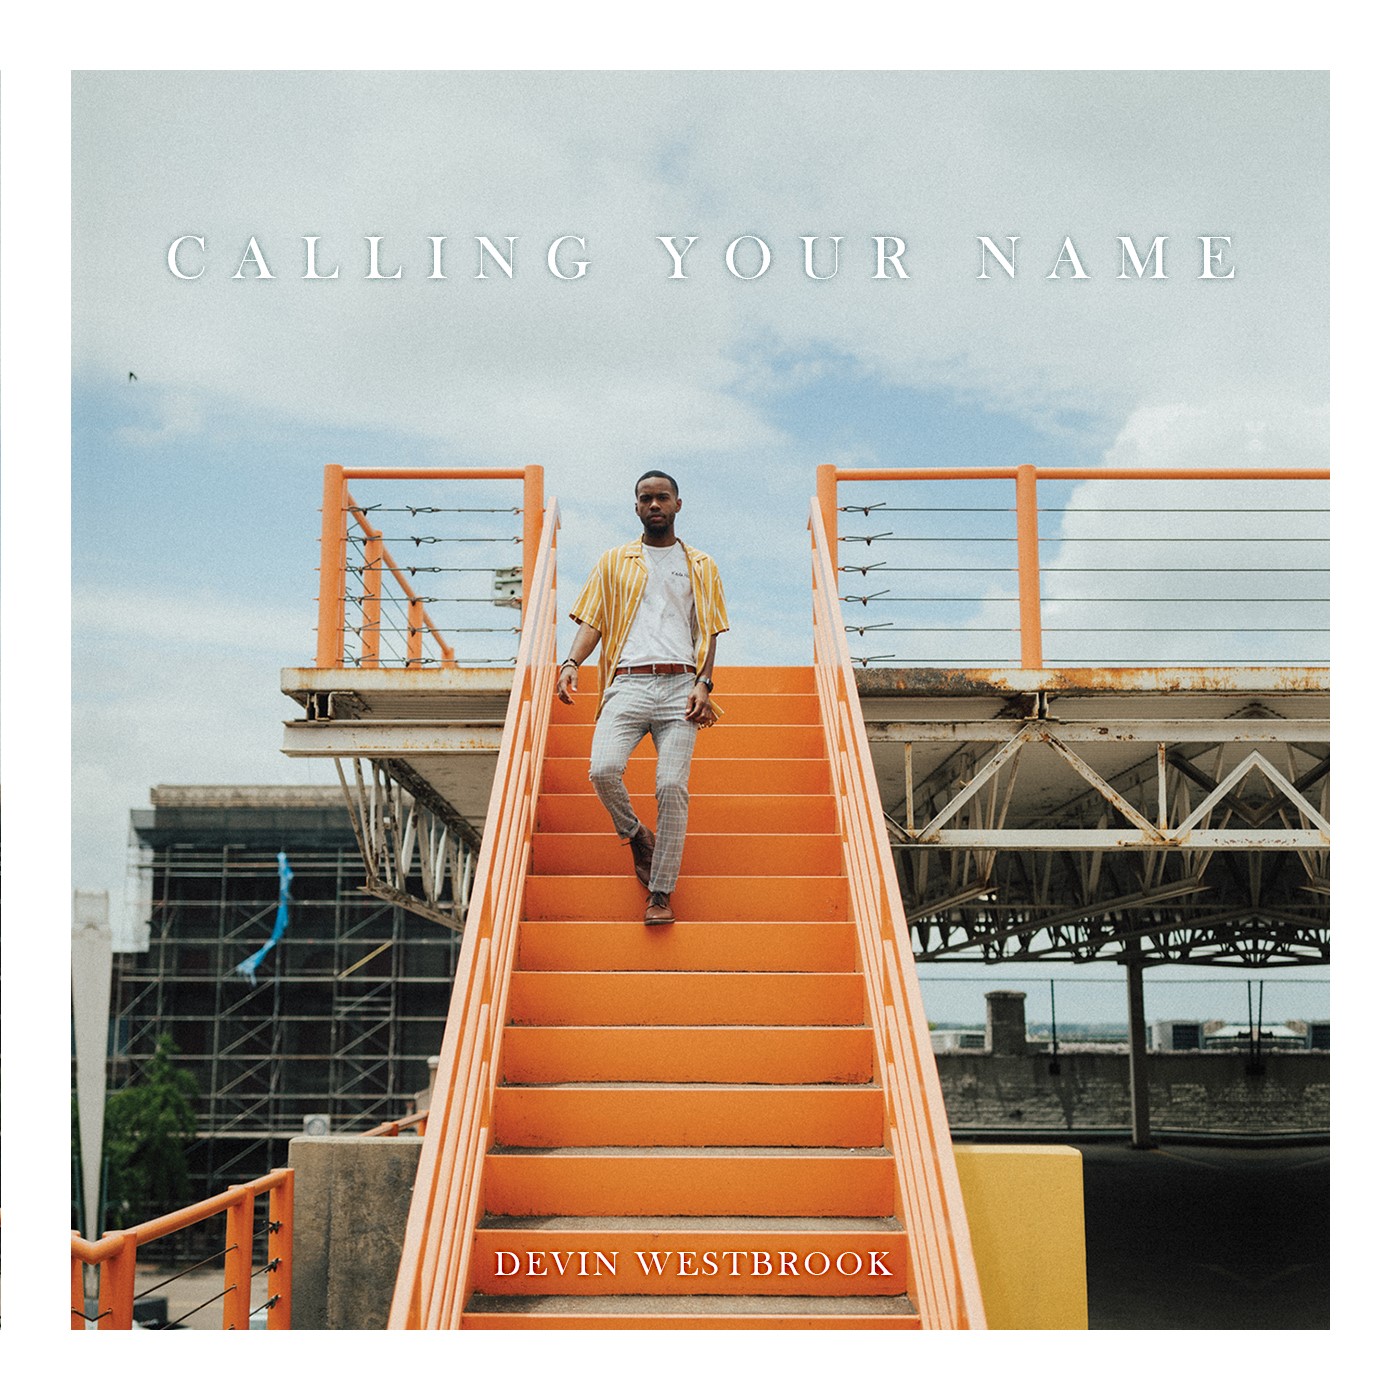 Devin Westbrook – Calling Your Name premiere